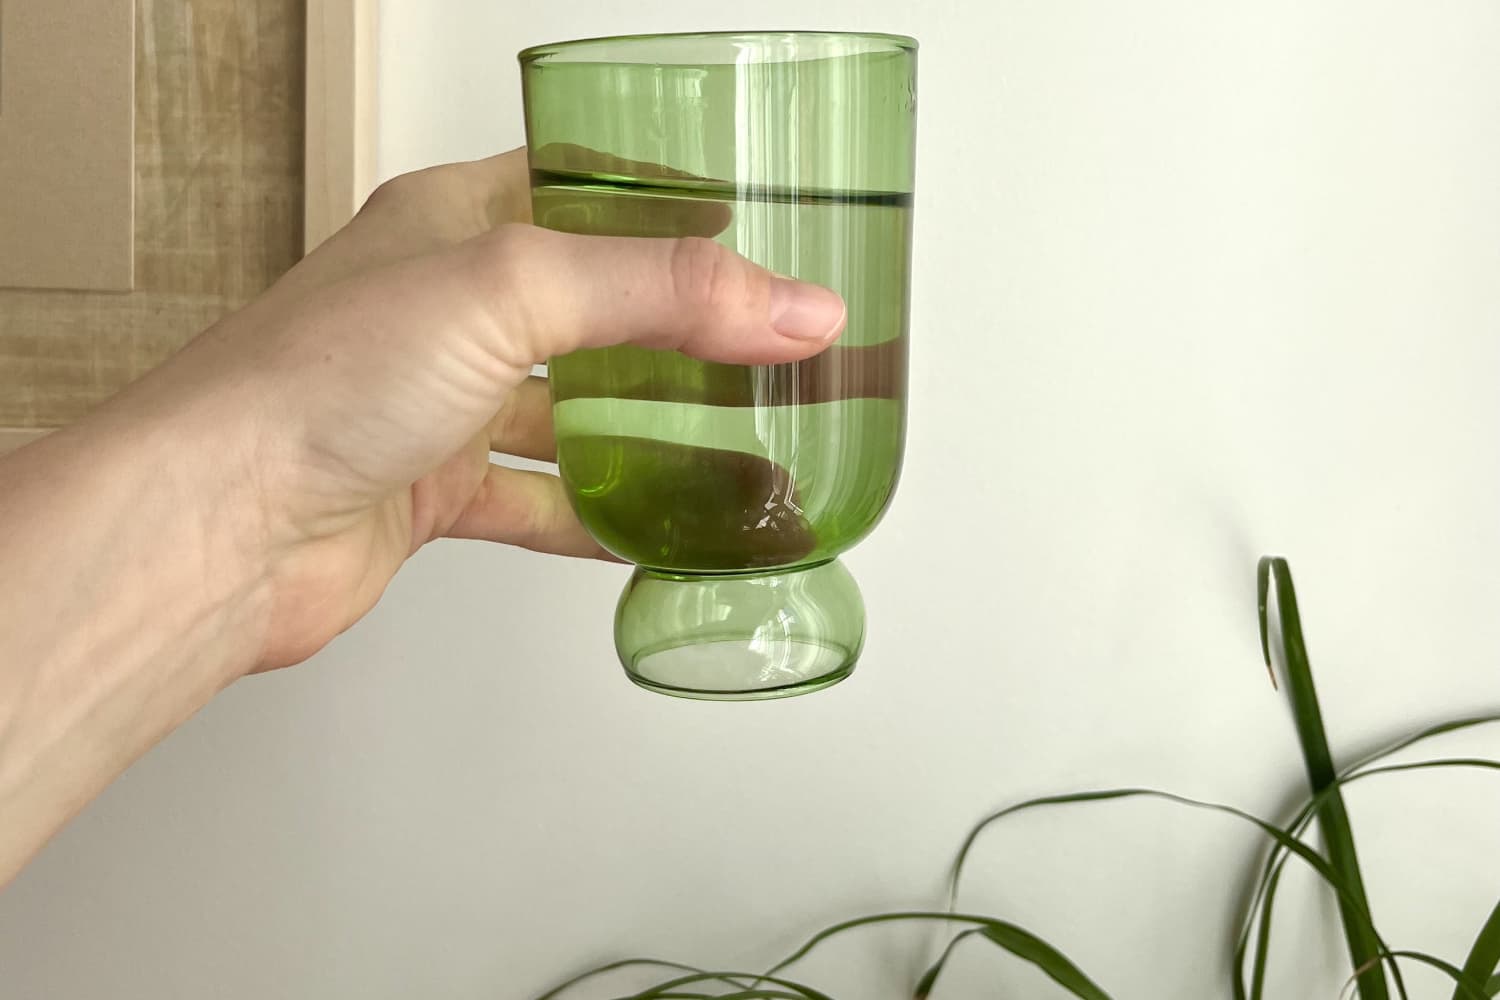 Drinking glass sets that will make sipping on juices much more